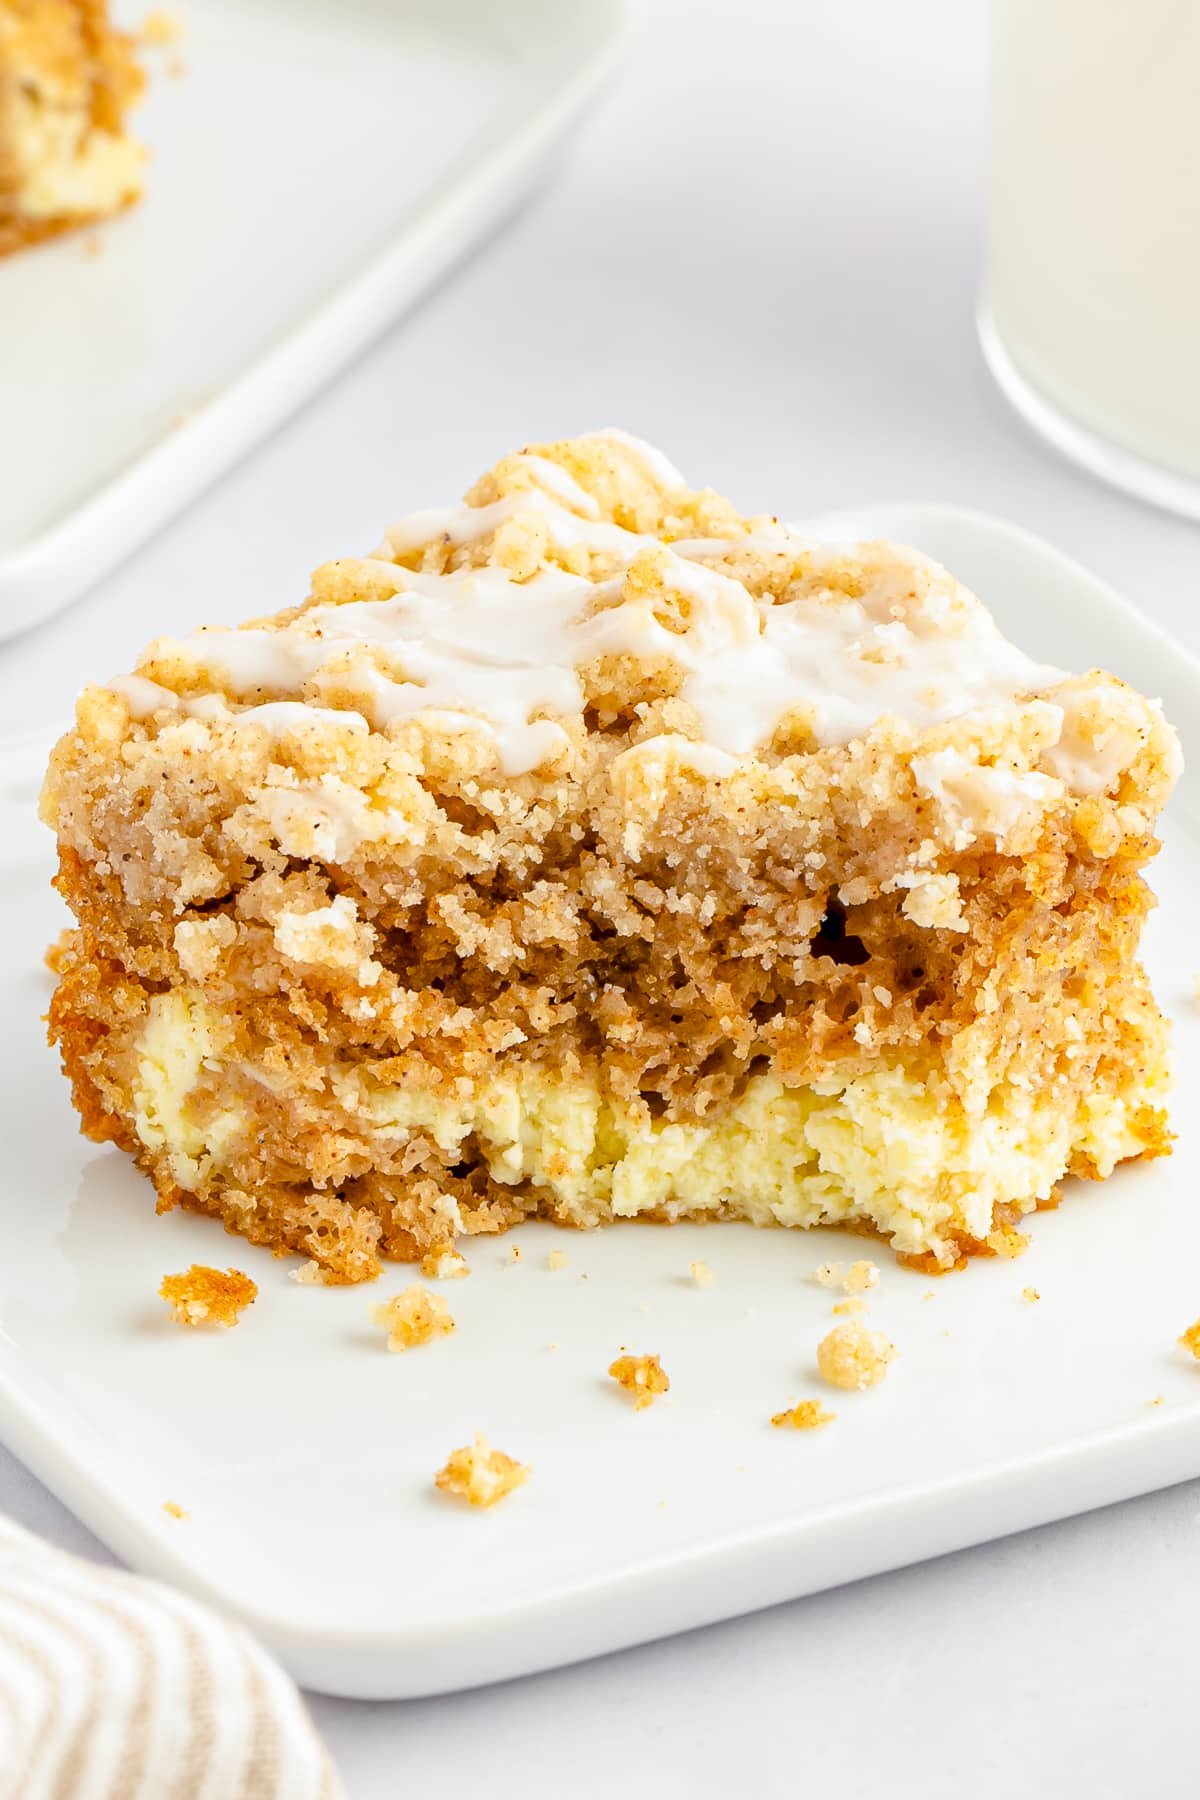 slice of crumb cake with a bite taken out